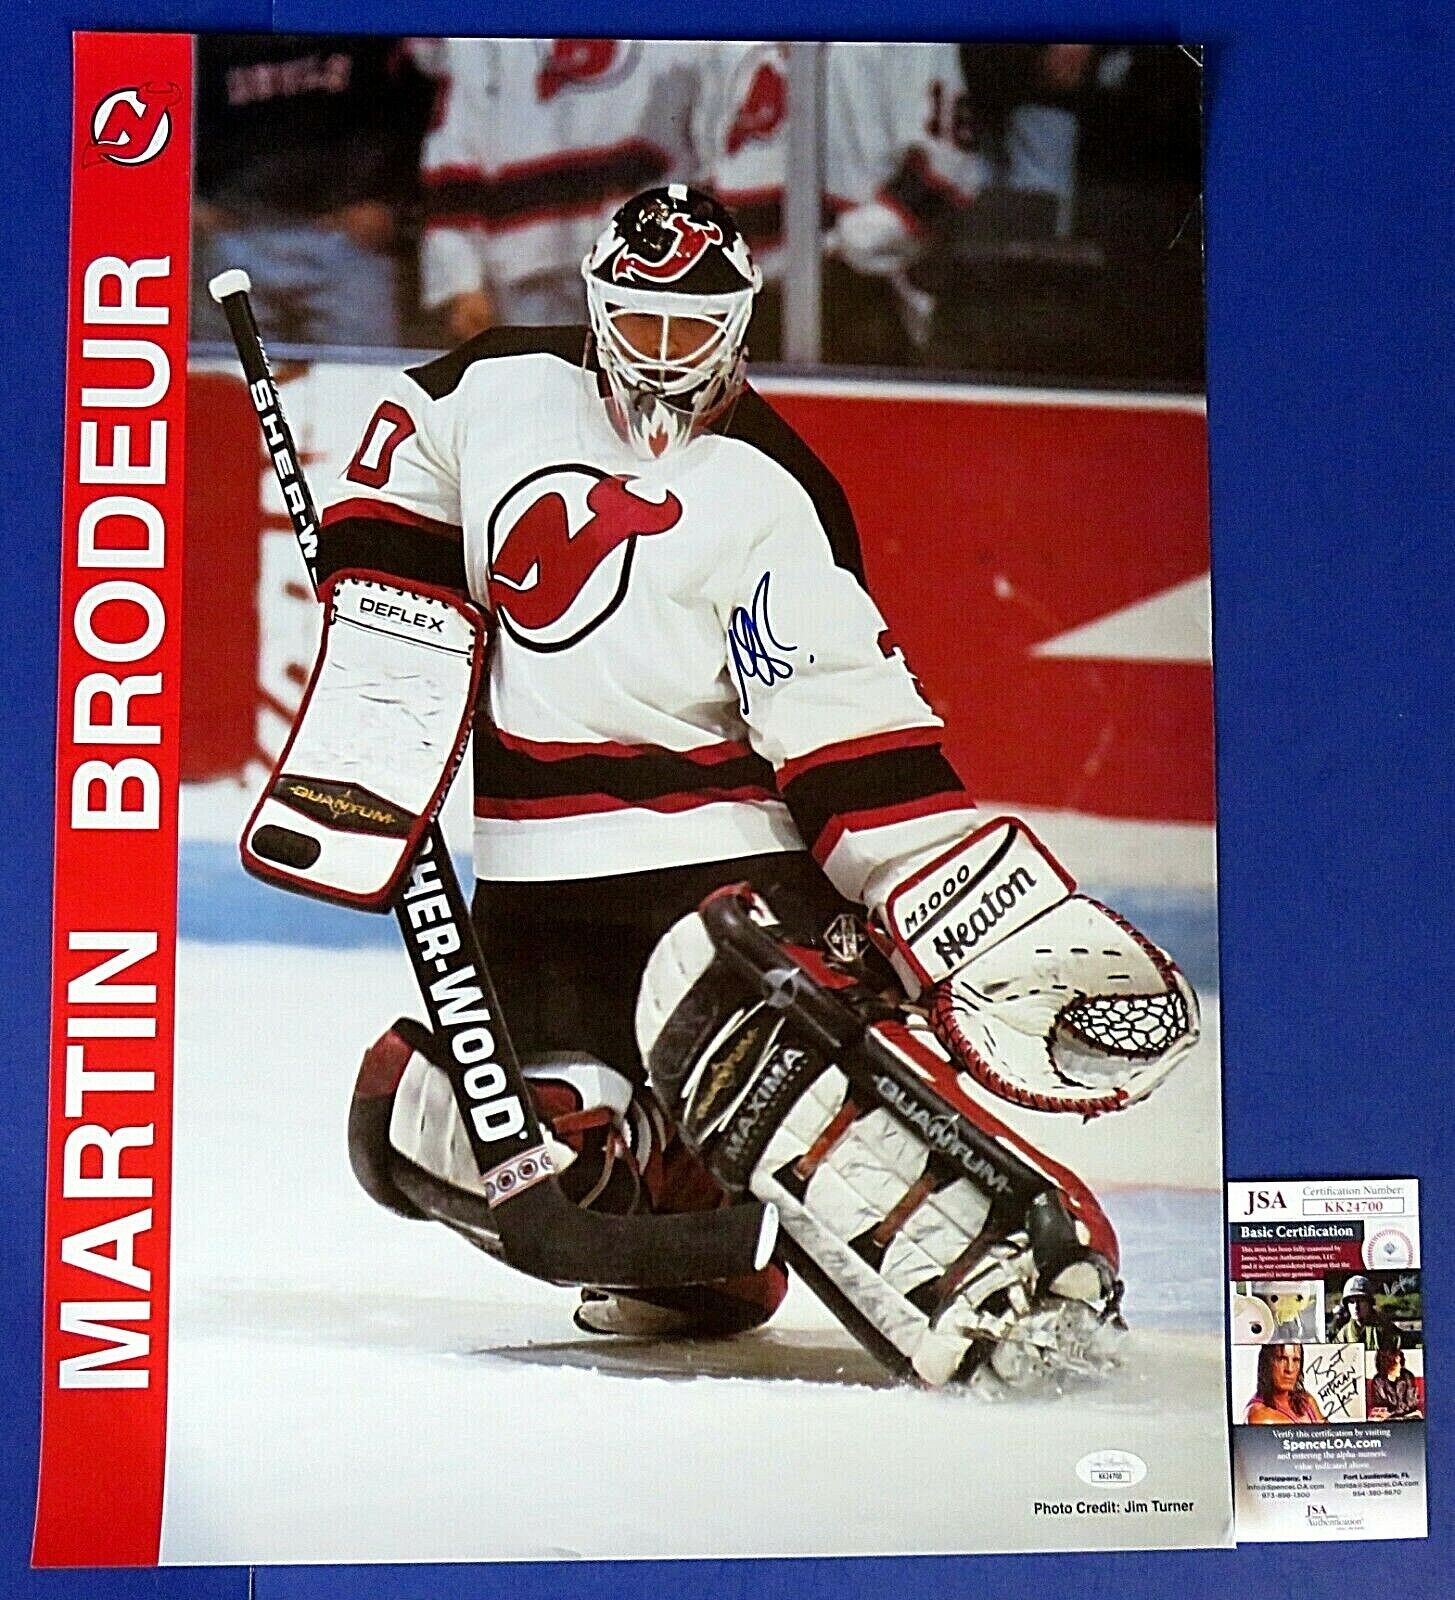 Martin Brodeur Signed Hockey Puck - 94 95 Stanley Cup Champs PSA